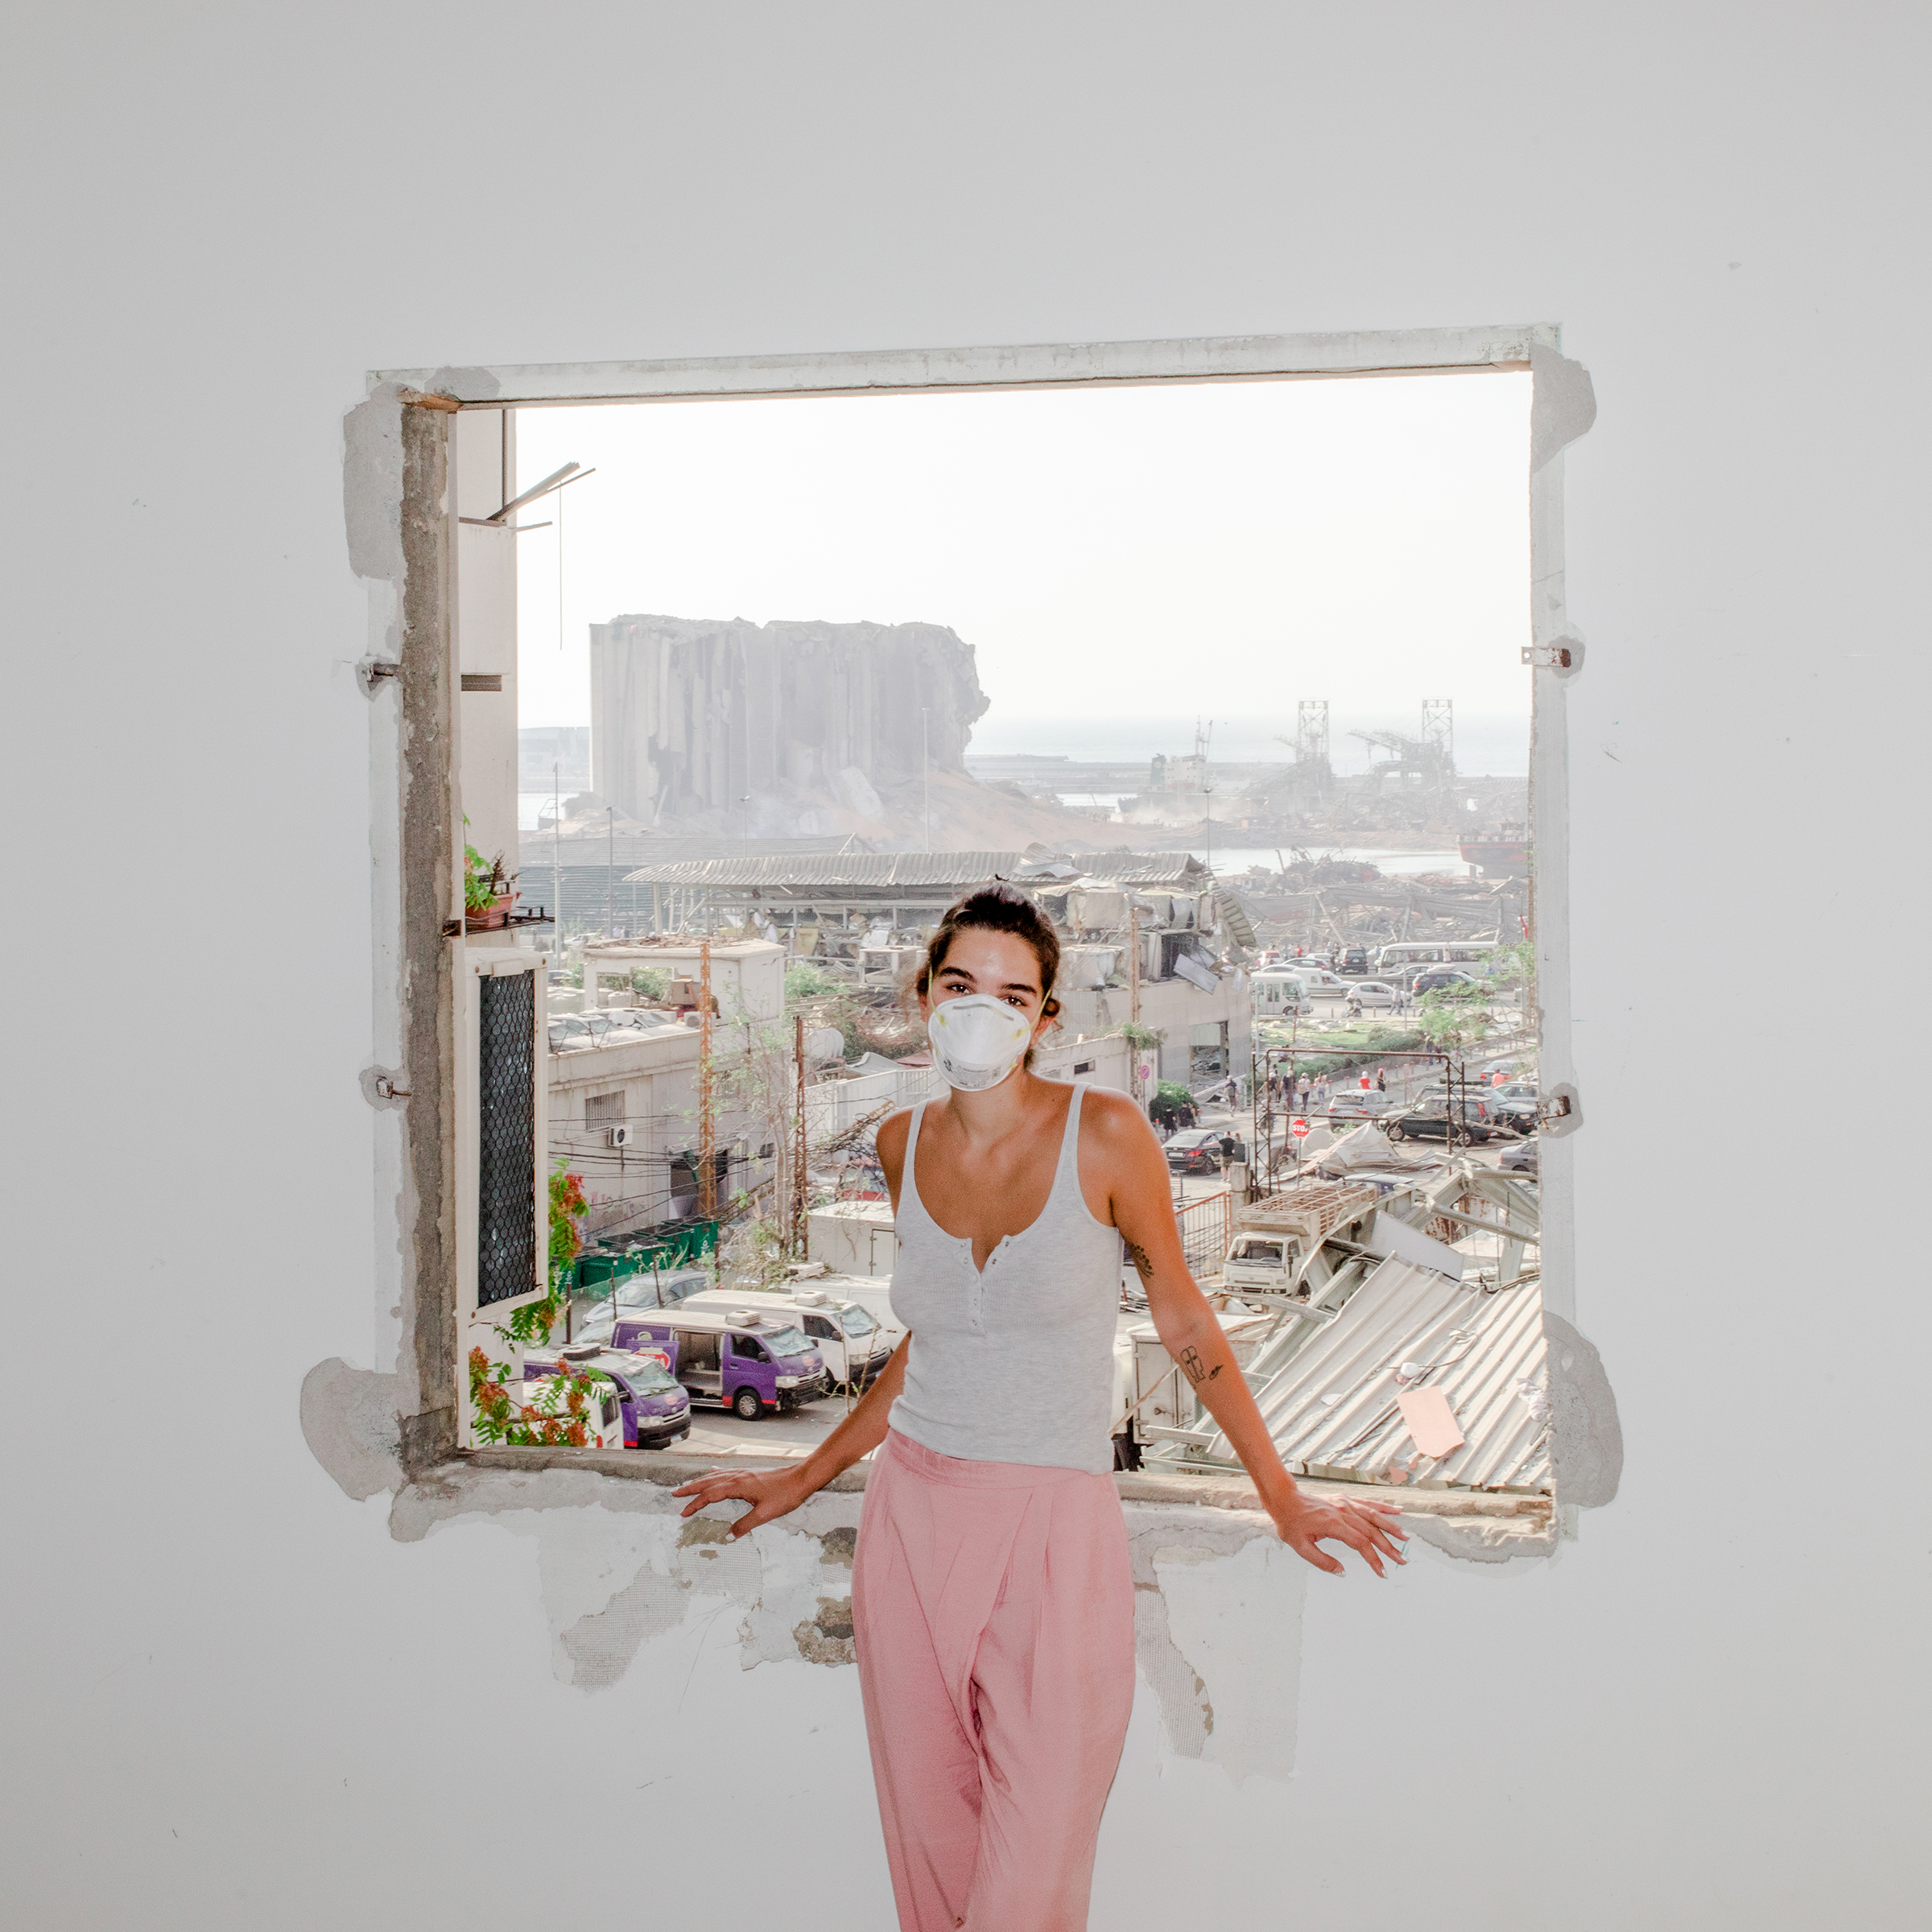 Nour Saliba stands in her apartment in the Mar Mikhael area of Beirut on Aug. 6, two days after the deadly explosion at the city’s port, seen through her blown-out window. “Honestly, I had it easy. I only lost my home. I am one of the lucky ones who still have their family and friends by their side,” says the 27-year-old community manager and model. “Trauma is written all over the fumes of this explosion. Yes, we are all traumatized, but we are also burnt out." (Myriam Boulos for TIME)